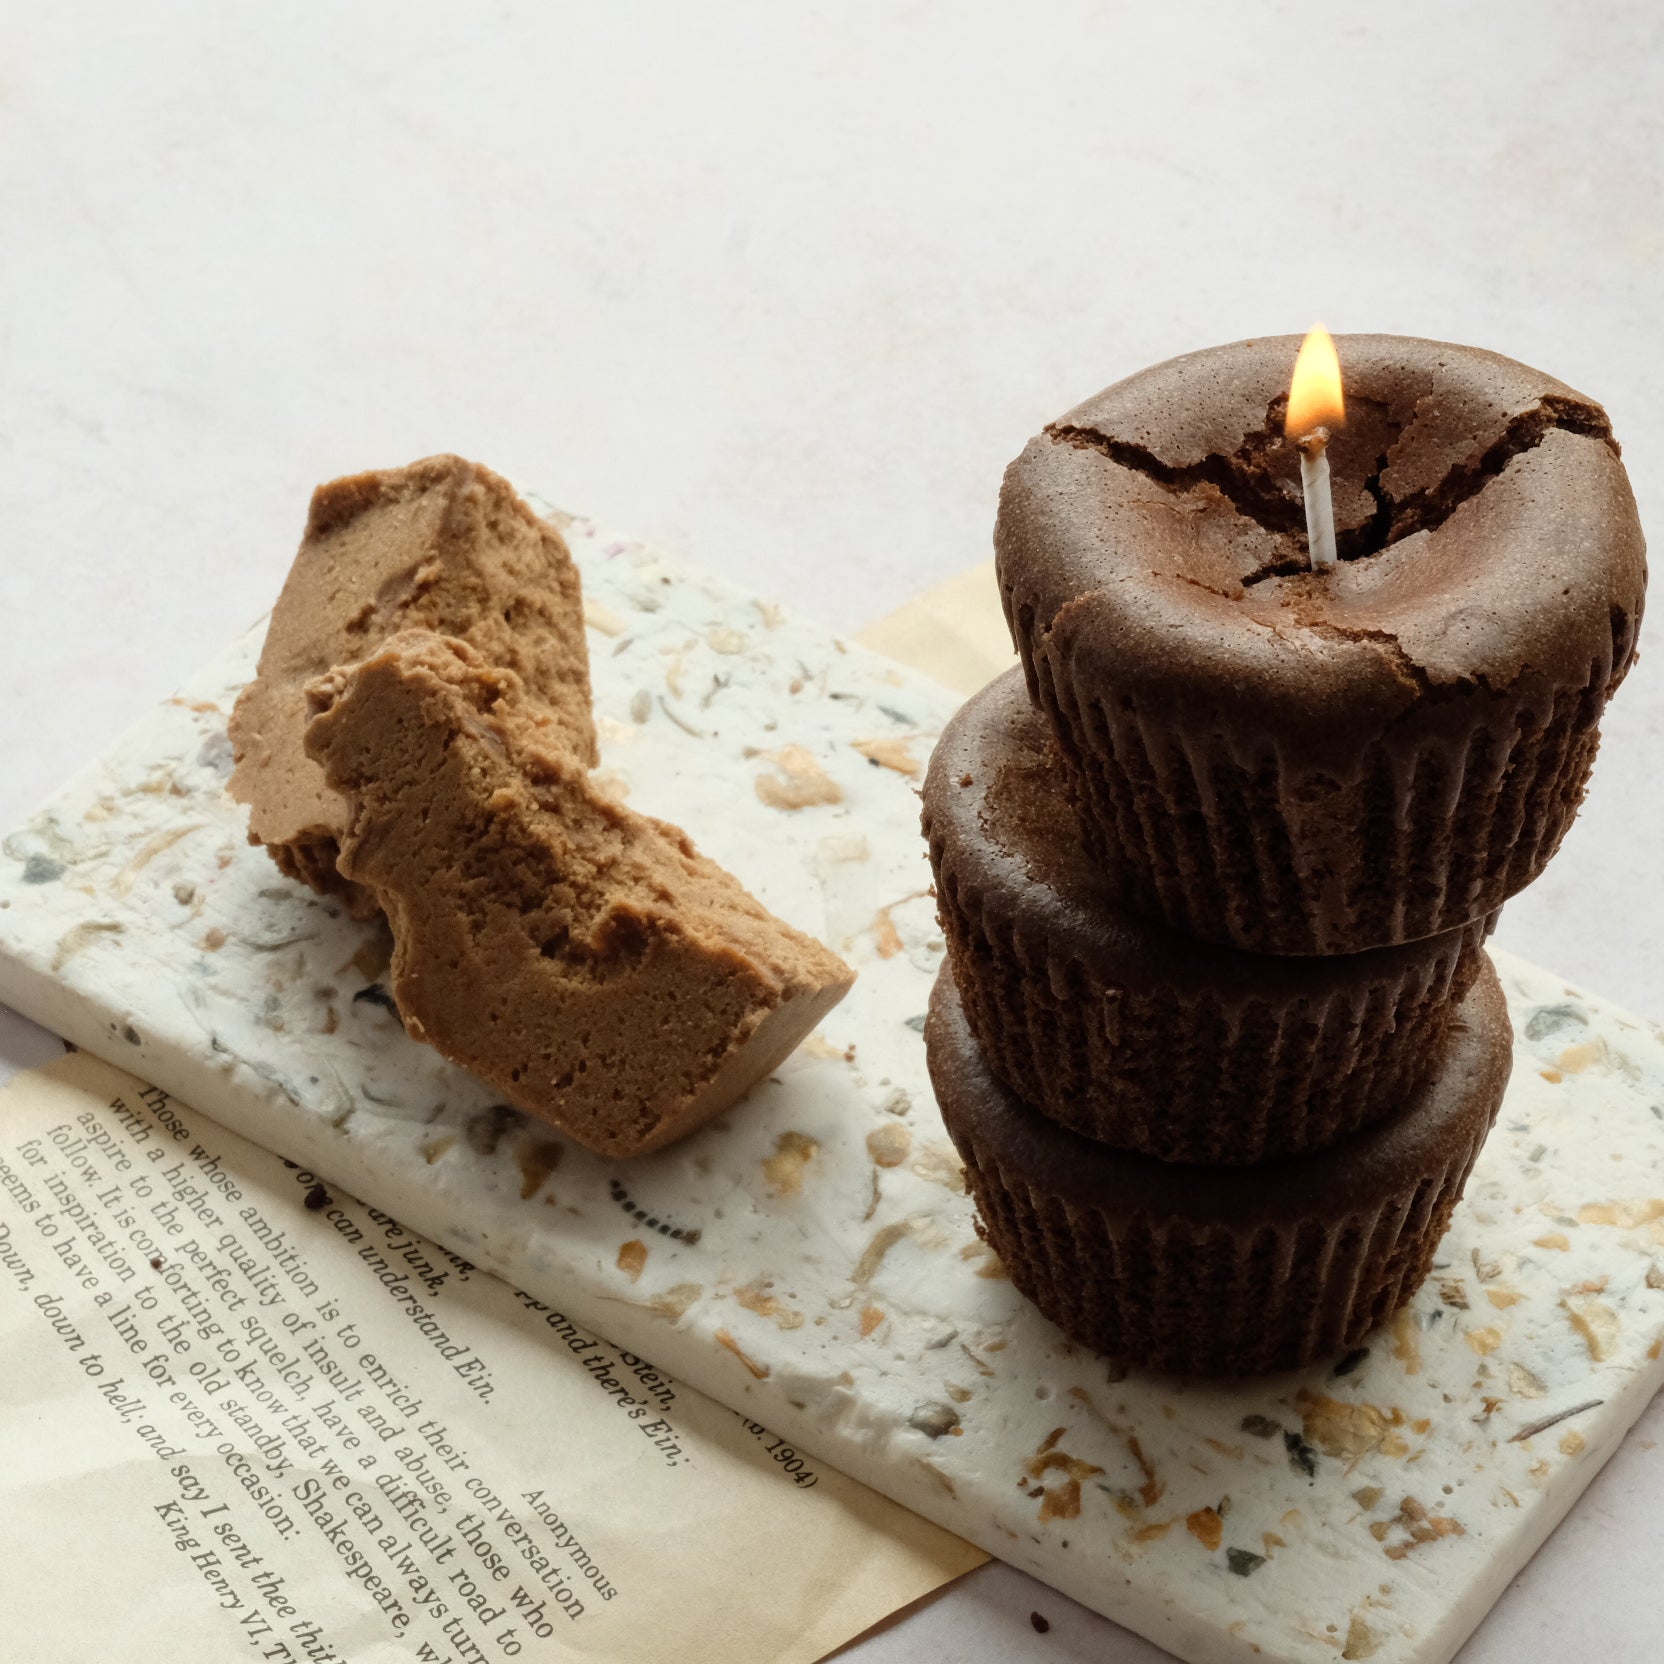 Cupcake baking candle video lesson